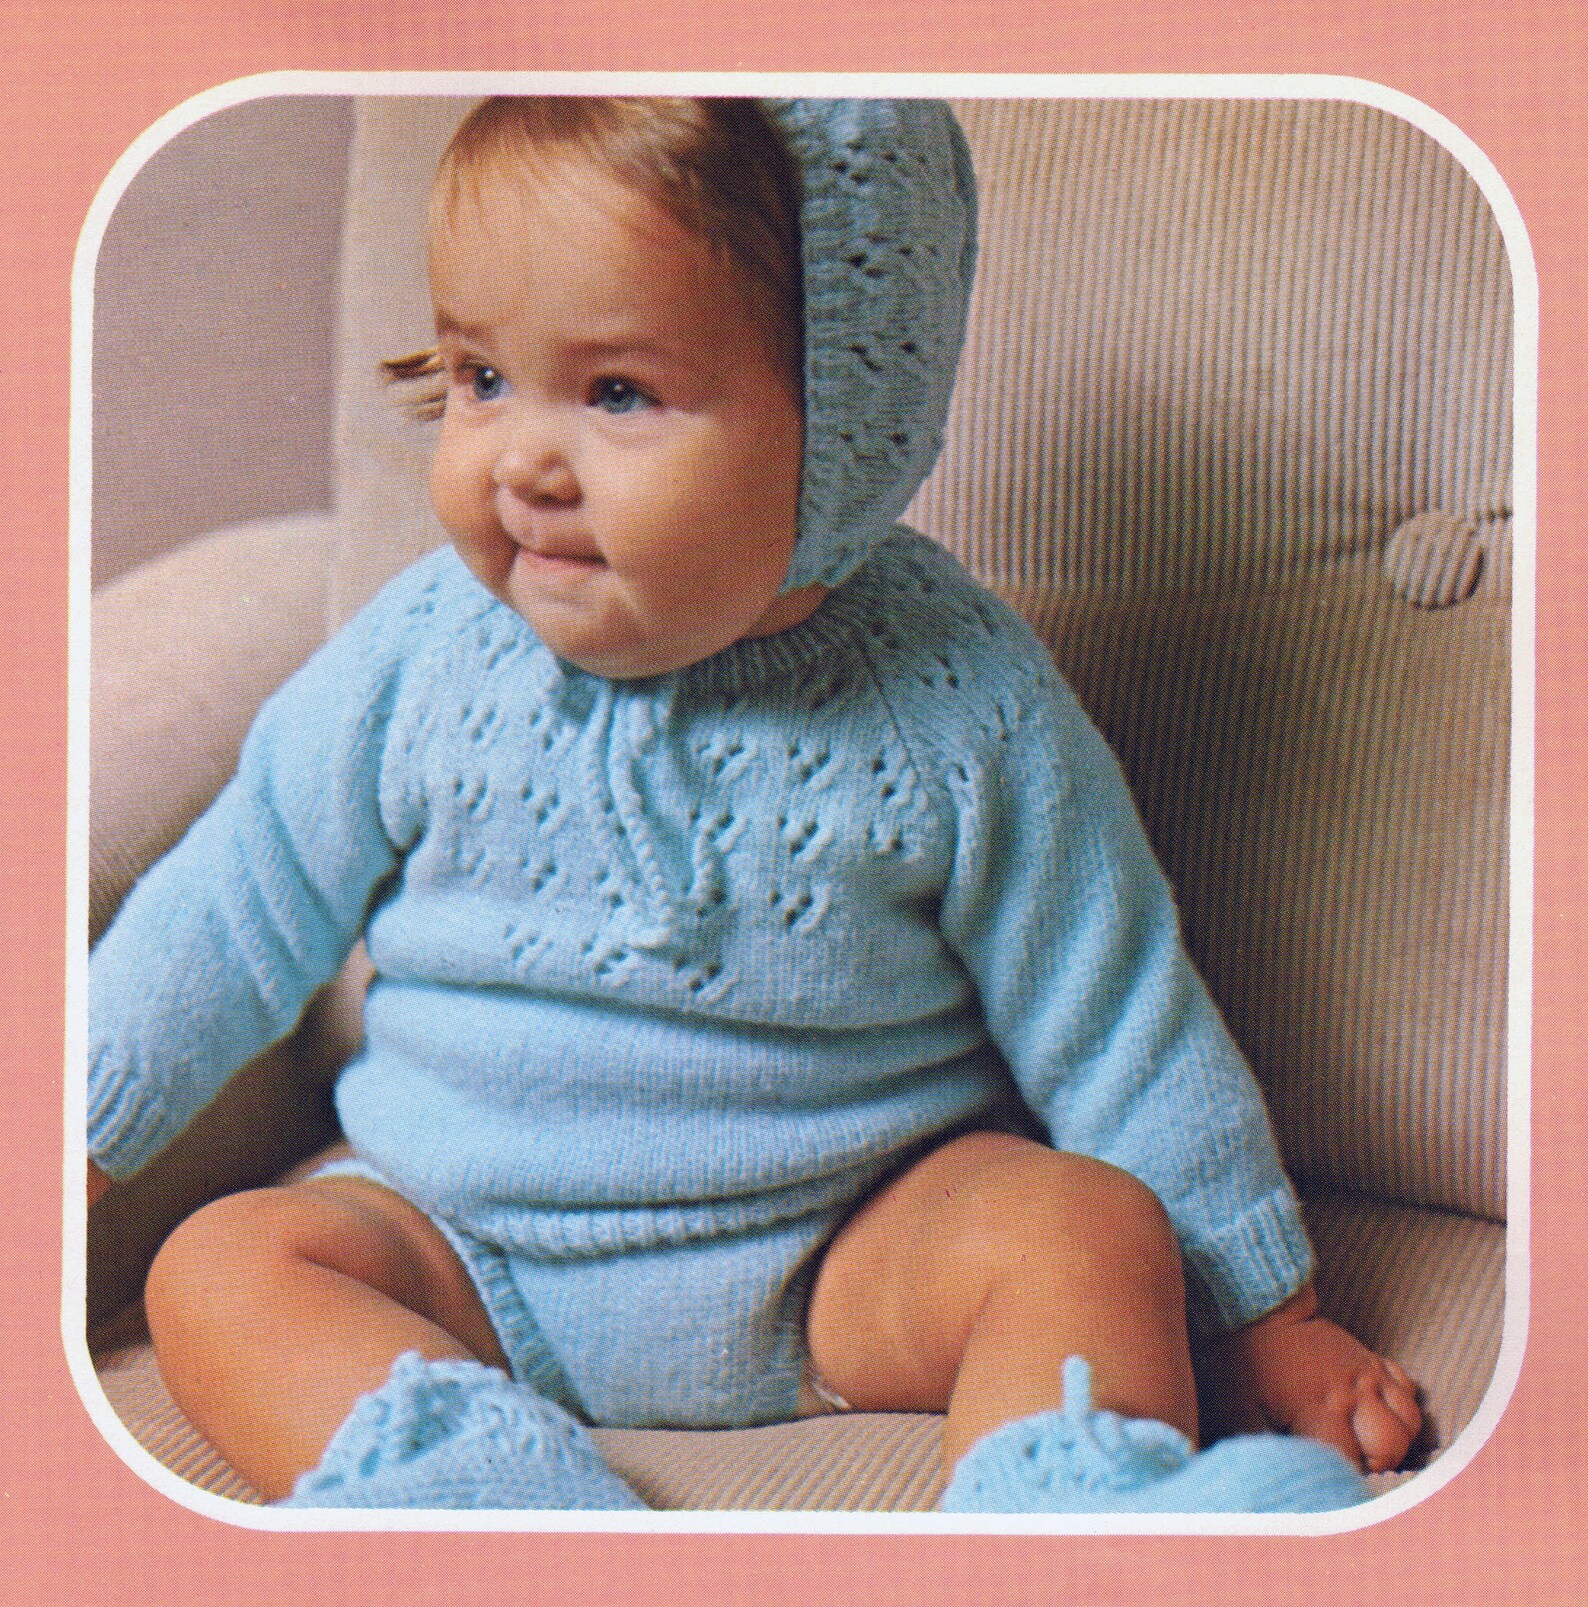 KNITTING PATTERNS, 6 12 Month Baby Clothing Set, Sleeved Pullover ...